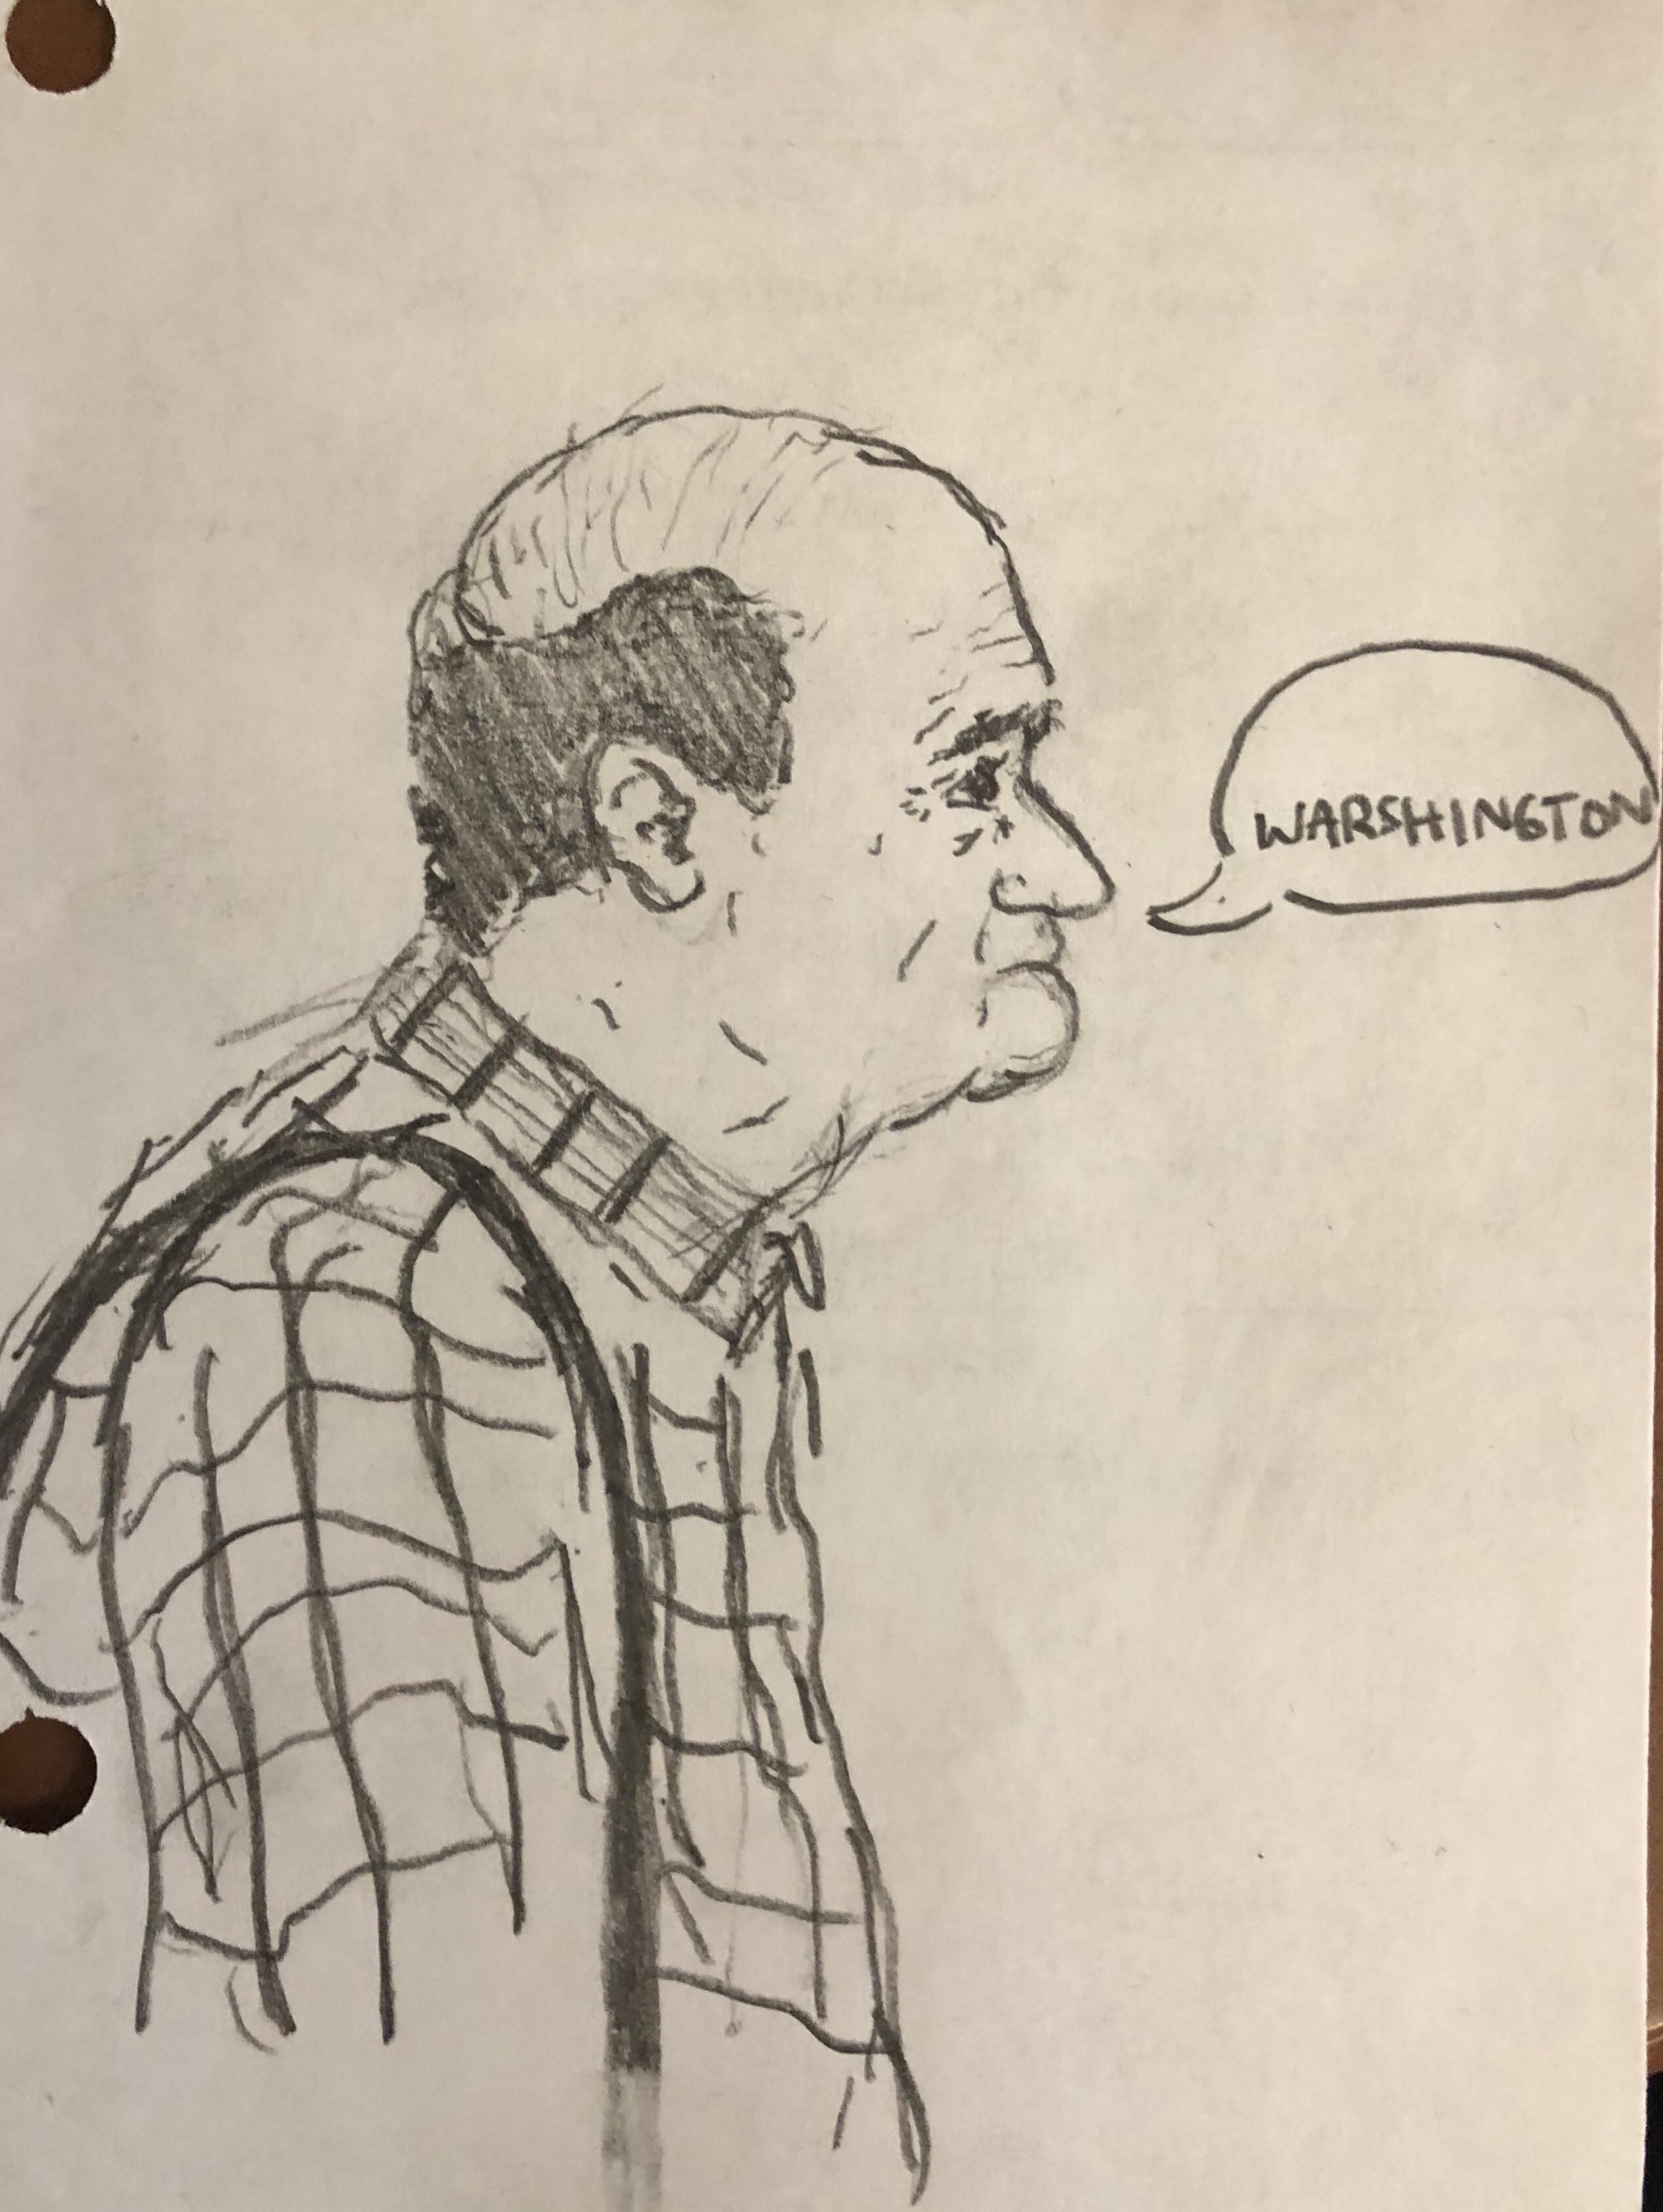 Friend at work challenged me to draw someone that looks like they would pronounce Washington like “warshington”. This is what I came up with: